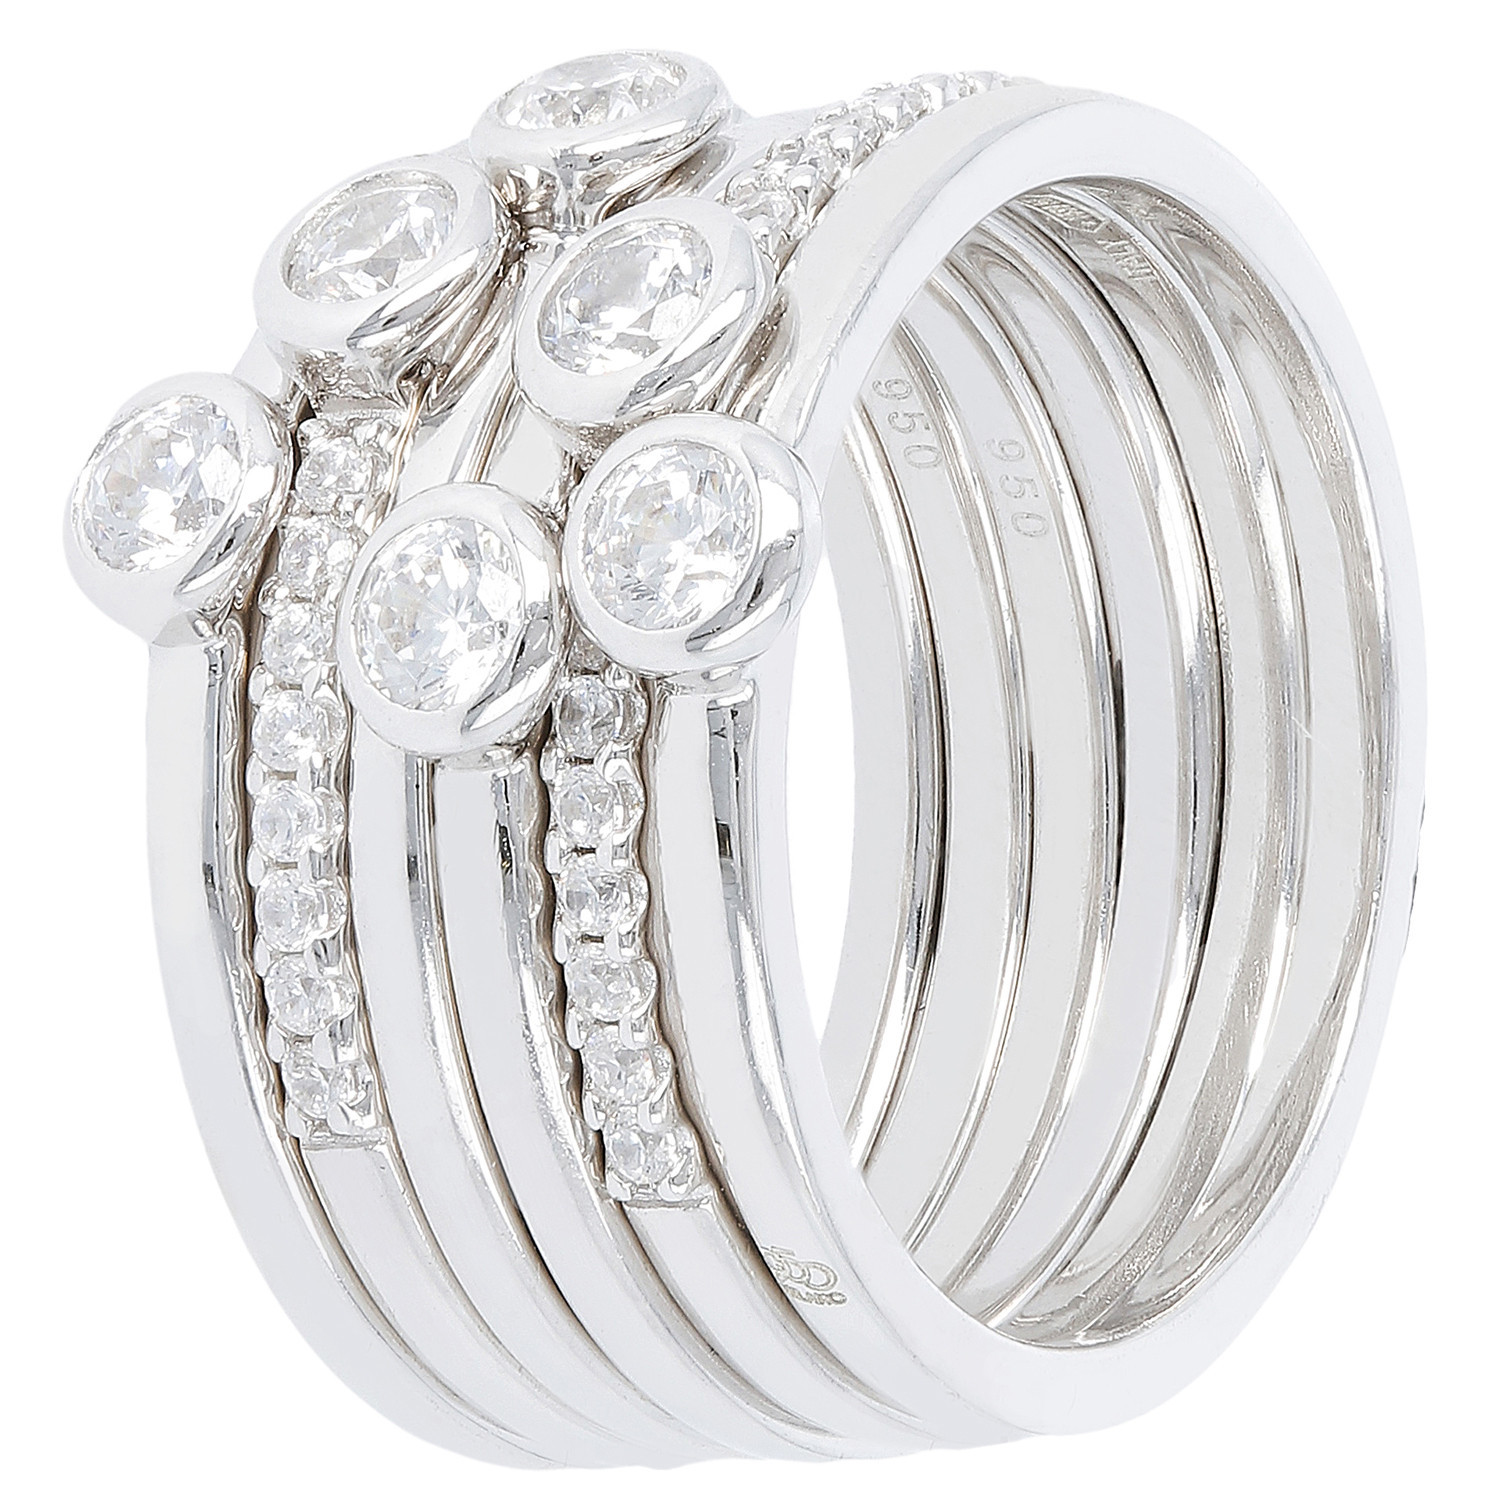 Bague 950 Milano argent pierres blanches
Collection Navigli